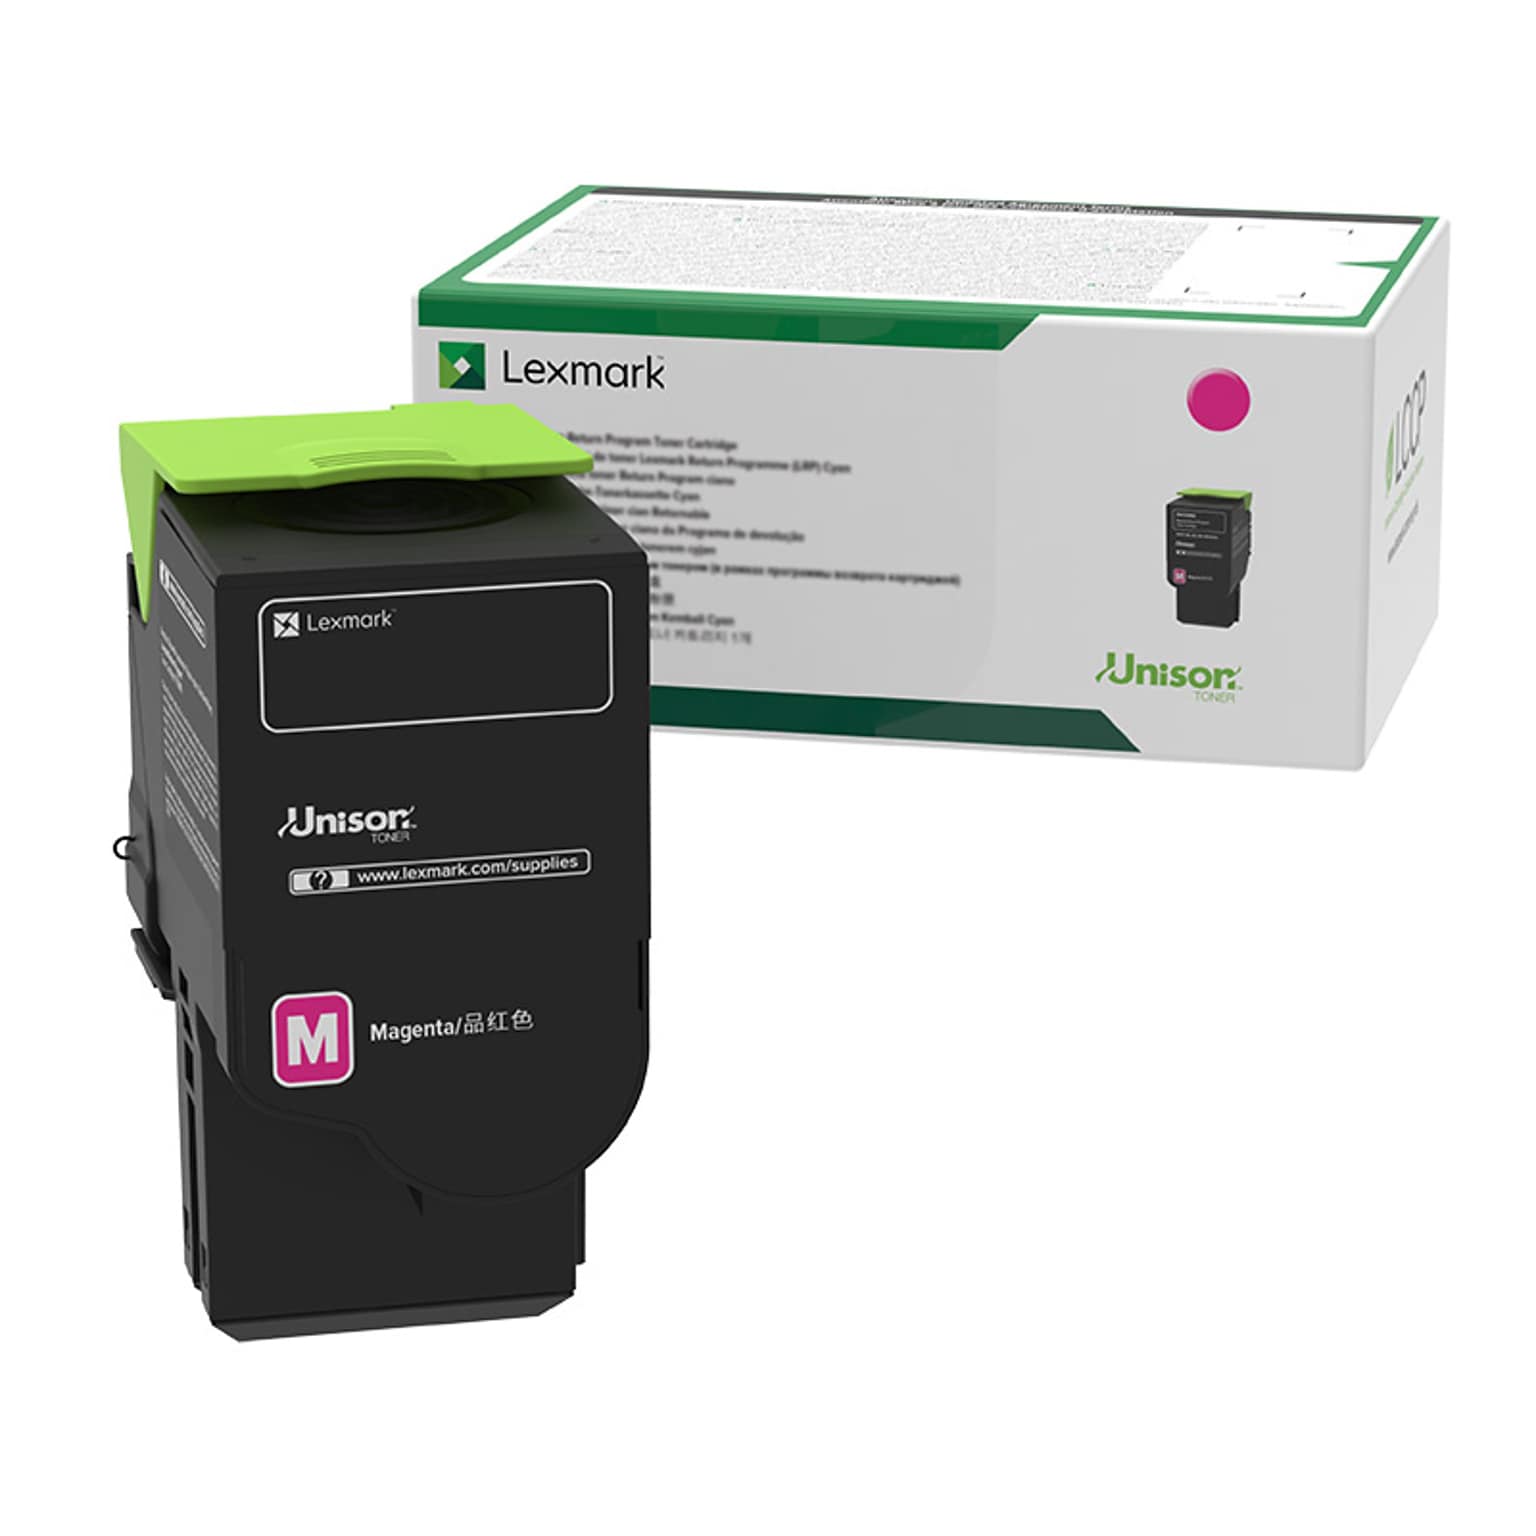 Lexmark 78 Magenta Extra High Yield Toner Cartridge, Prints Up to 5,000 Pages (78C1XM0)